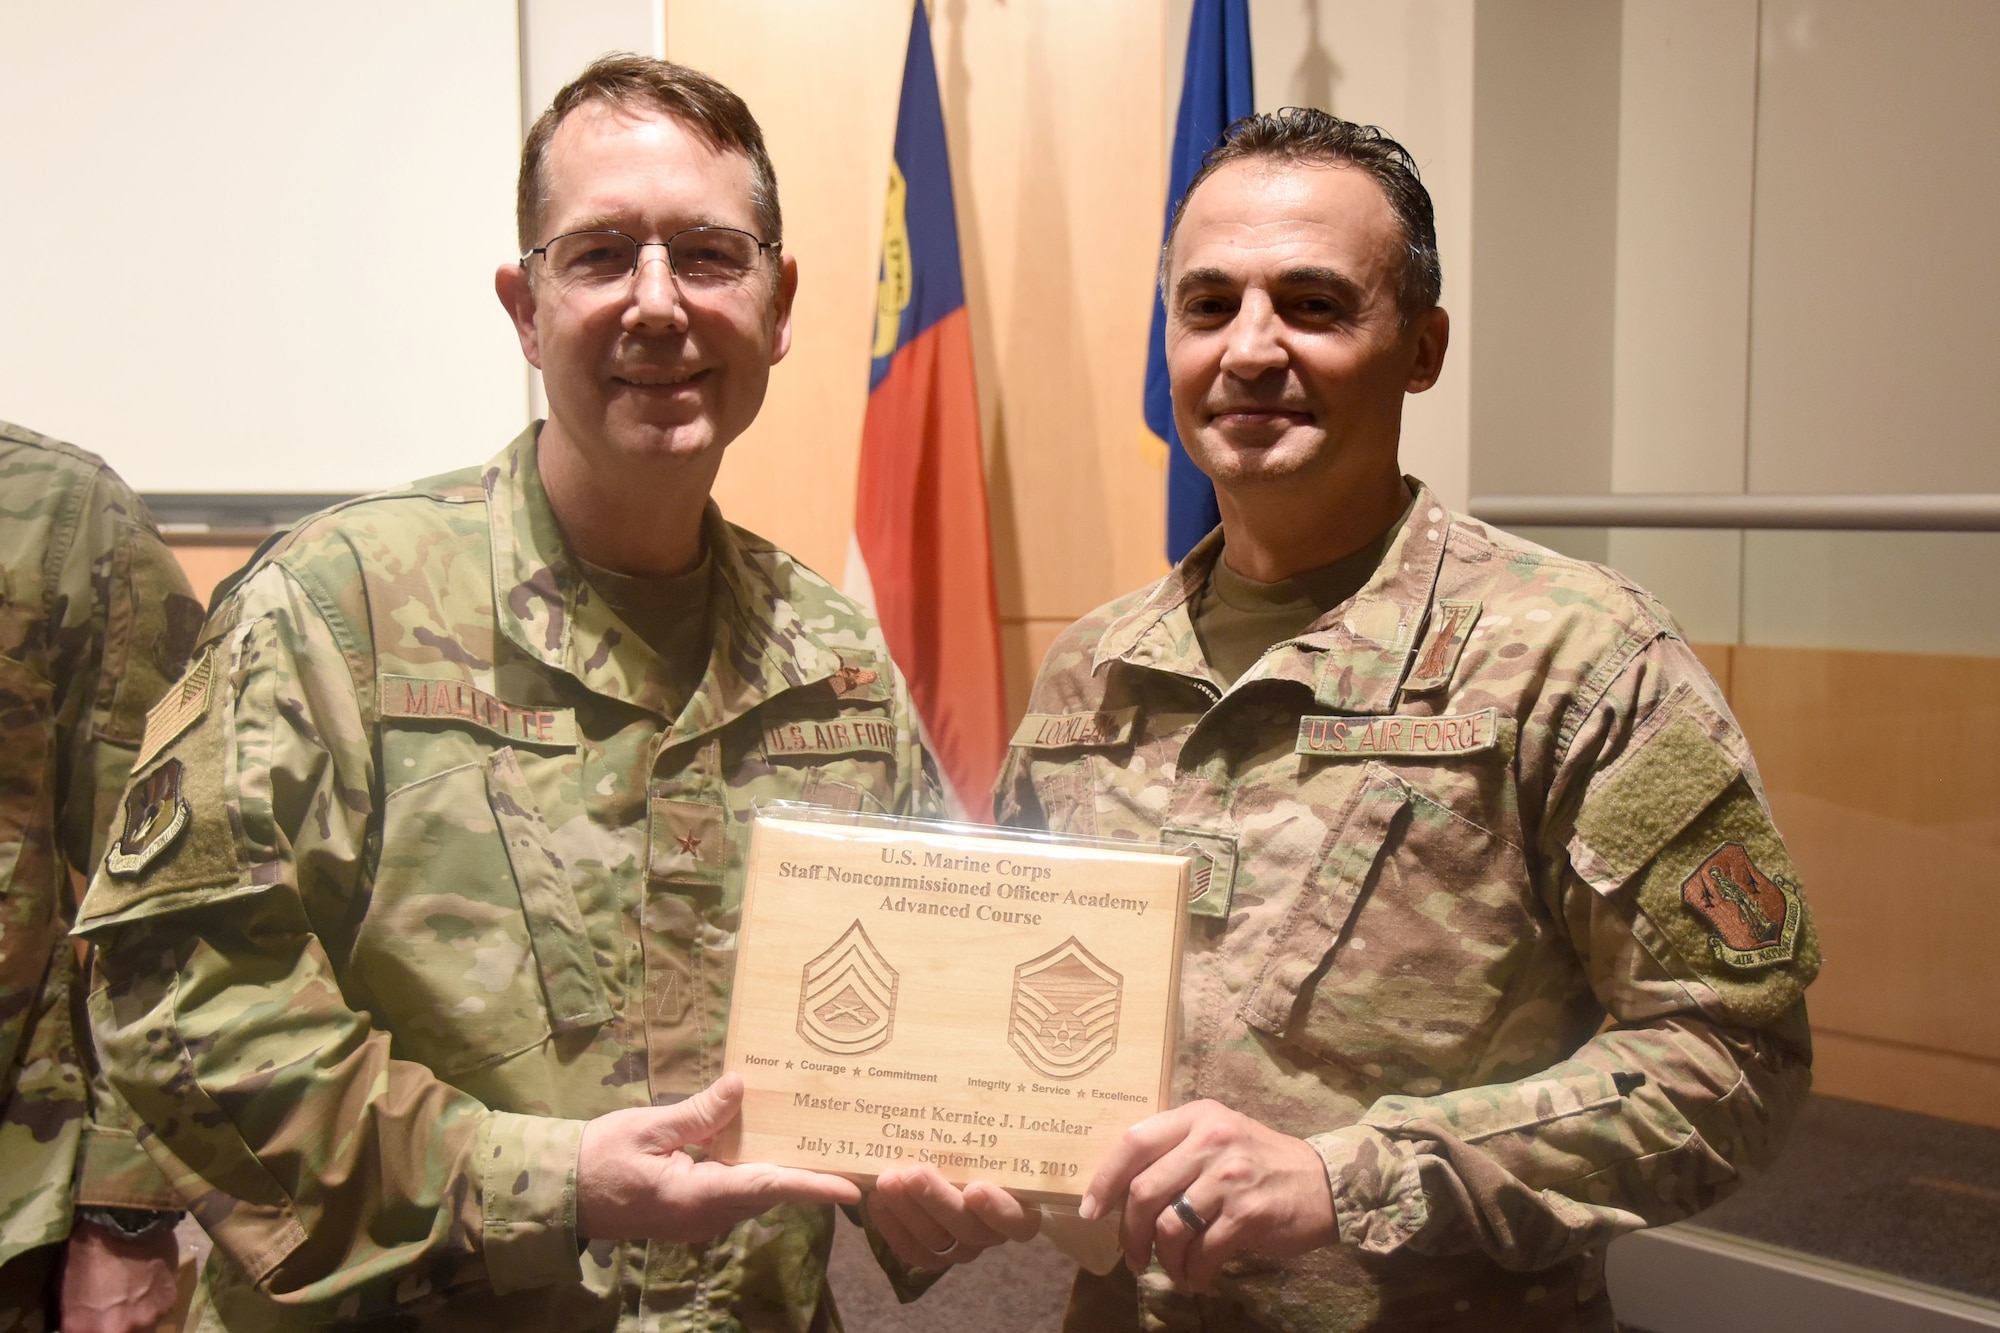 U.S. Air Force North Carolina Assistant Adjutant General for Air, Brig. Gen. Stephen Mallette (left), presents Master Sgt. Kernice Locklear, 263rd Combat Communications Squadron (right), with an award during an all-call held at the New London, N.C. Air National Guard Base (NCANG) headquarters, Jan. 12, 2020. Members of the NCANG celebrated the accomplishments of Master Sgt. Judd Locklear who attended the United States Marine Corps Staff Non-Commissioned Officer Academy last year in an effort to better understand the traditions and customs of a sister service. Since attending the academies, Locklear has implemented U.S. Marine Corps. practices such as sharing unit history and helping newer Airmen feel more involved with more responsibilities.